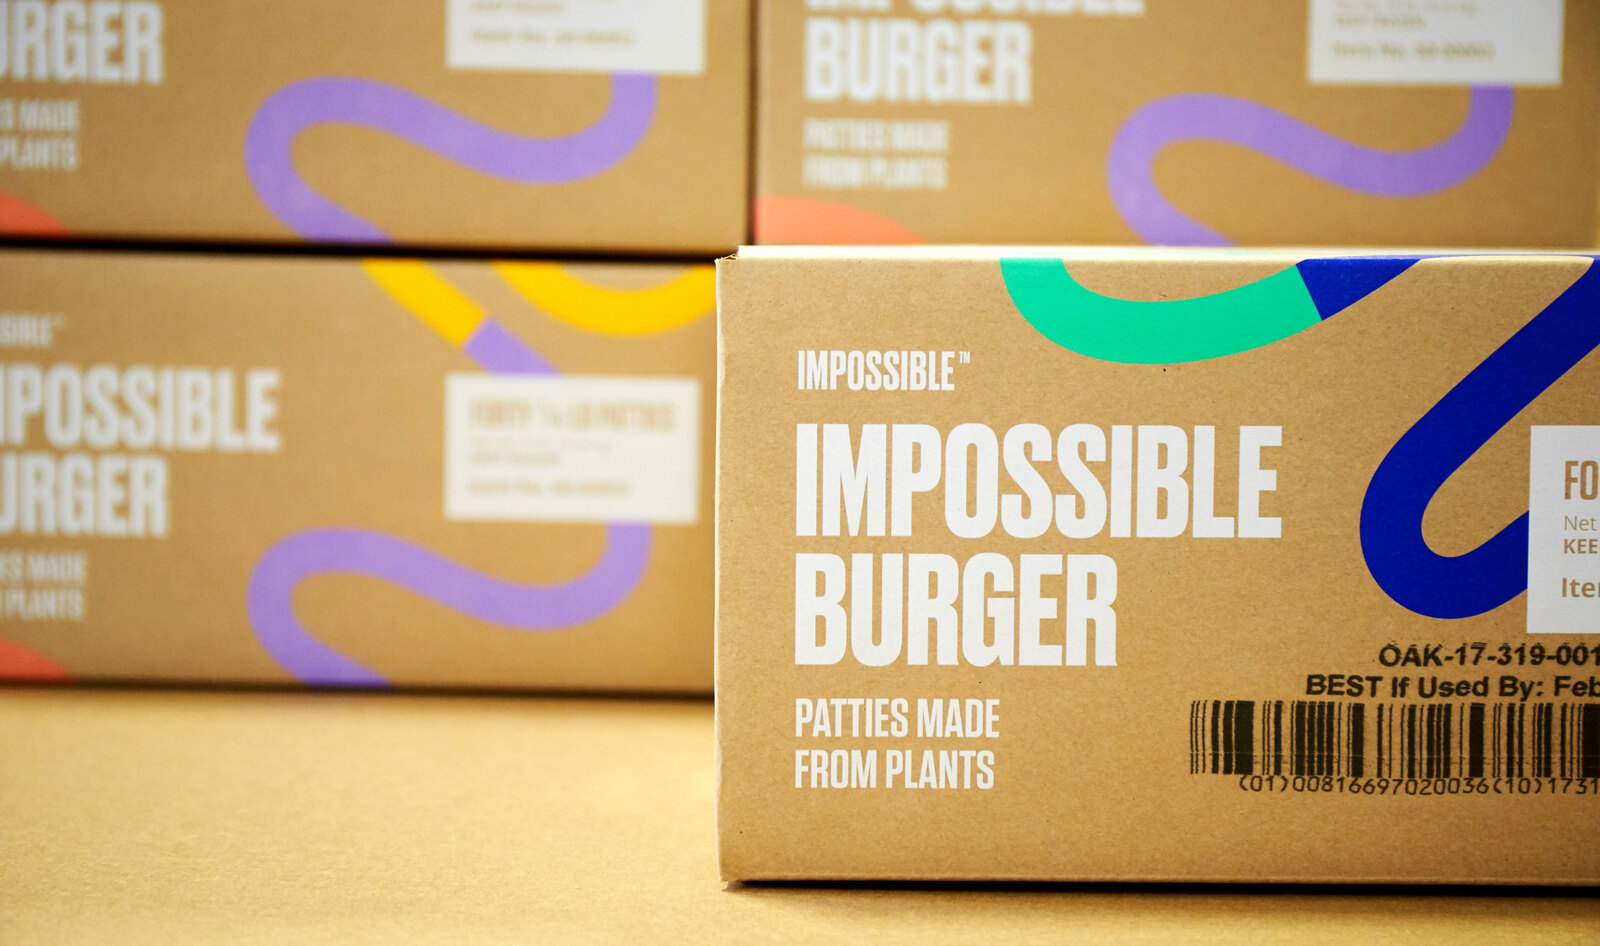 Restaurants Can Now Sell Five-Pound Bricks of Plant-Based Impossible Burgers Directly to Consumers